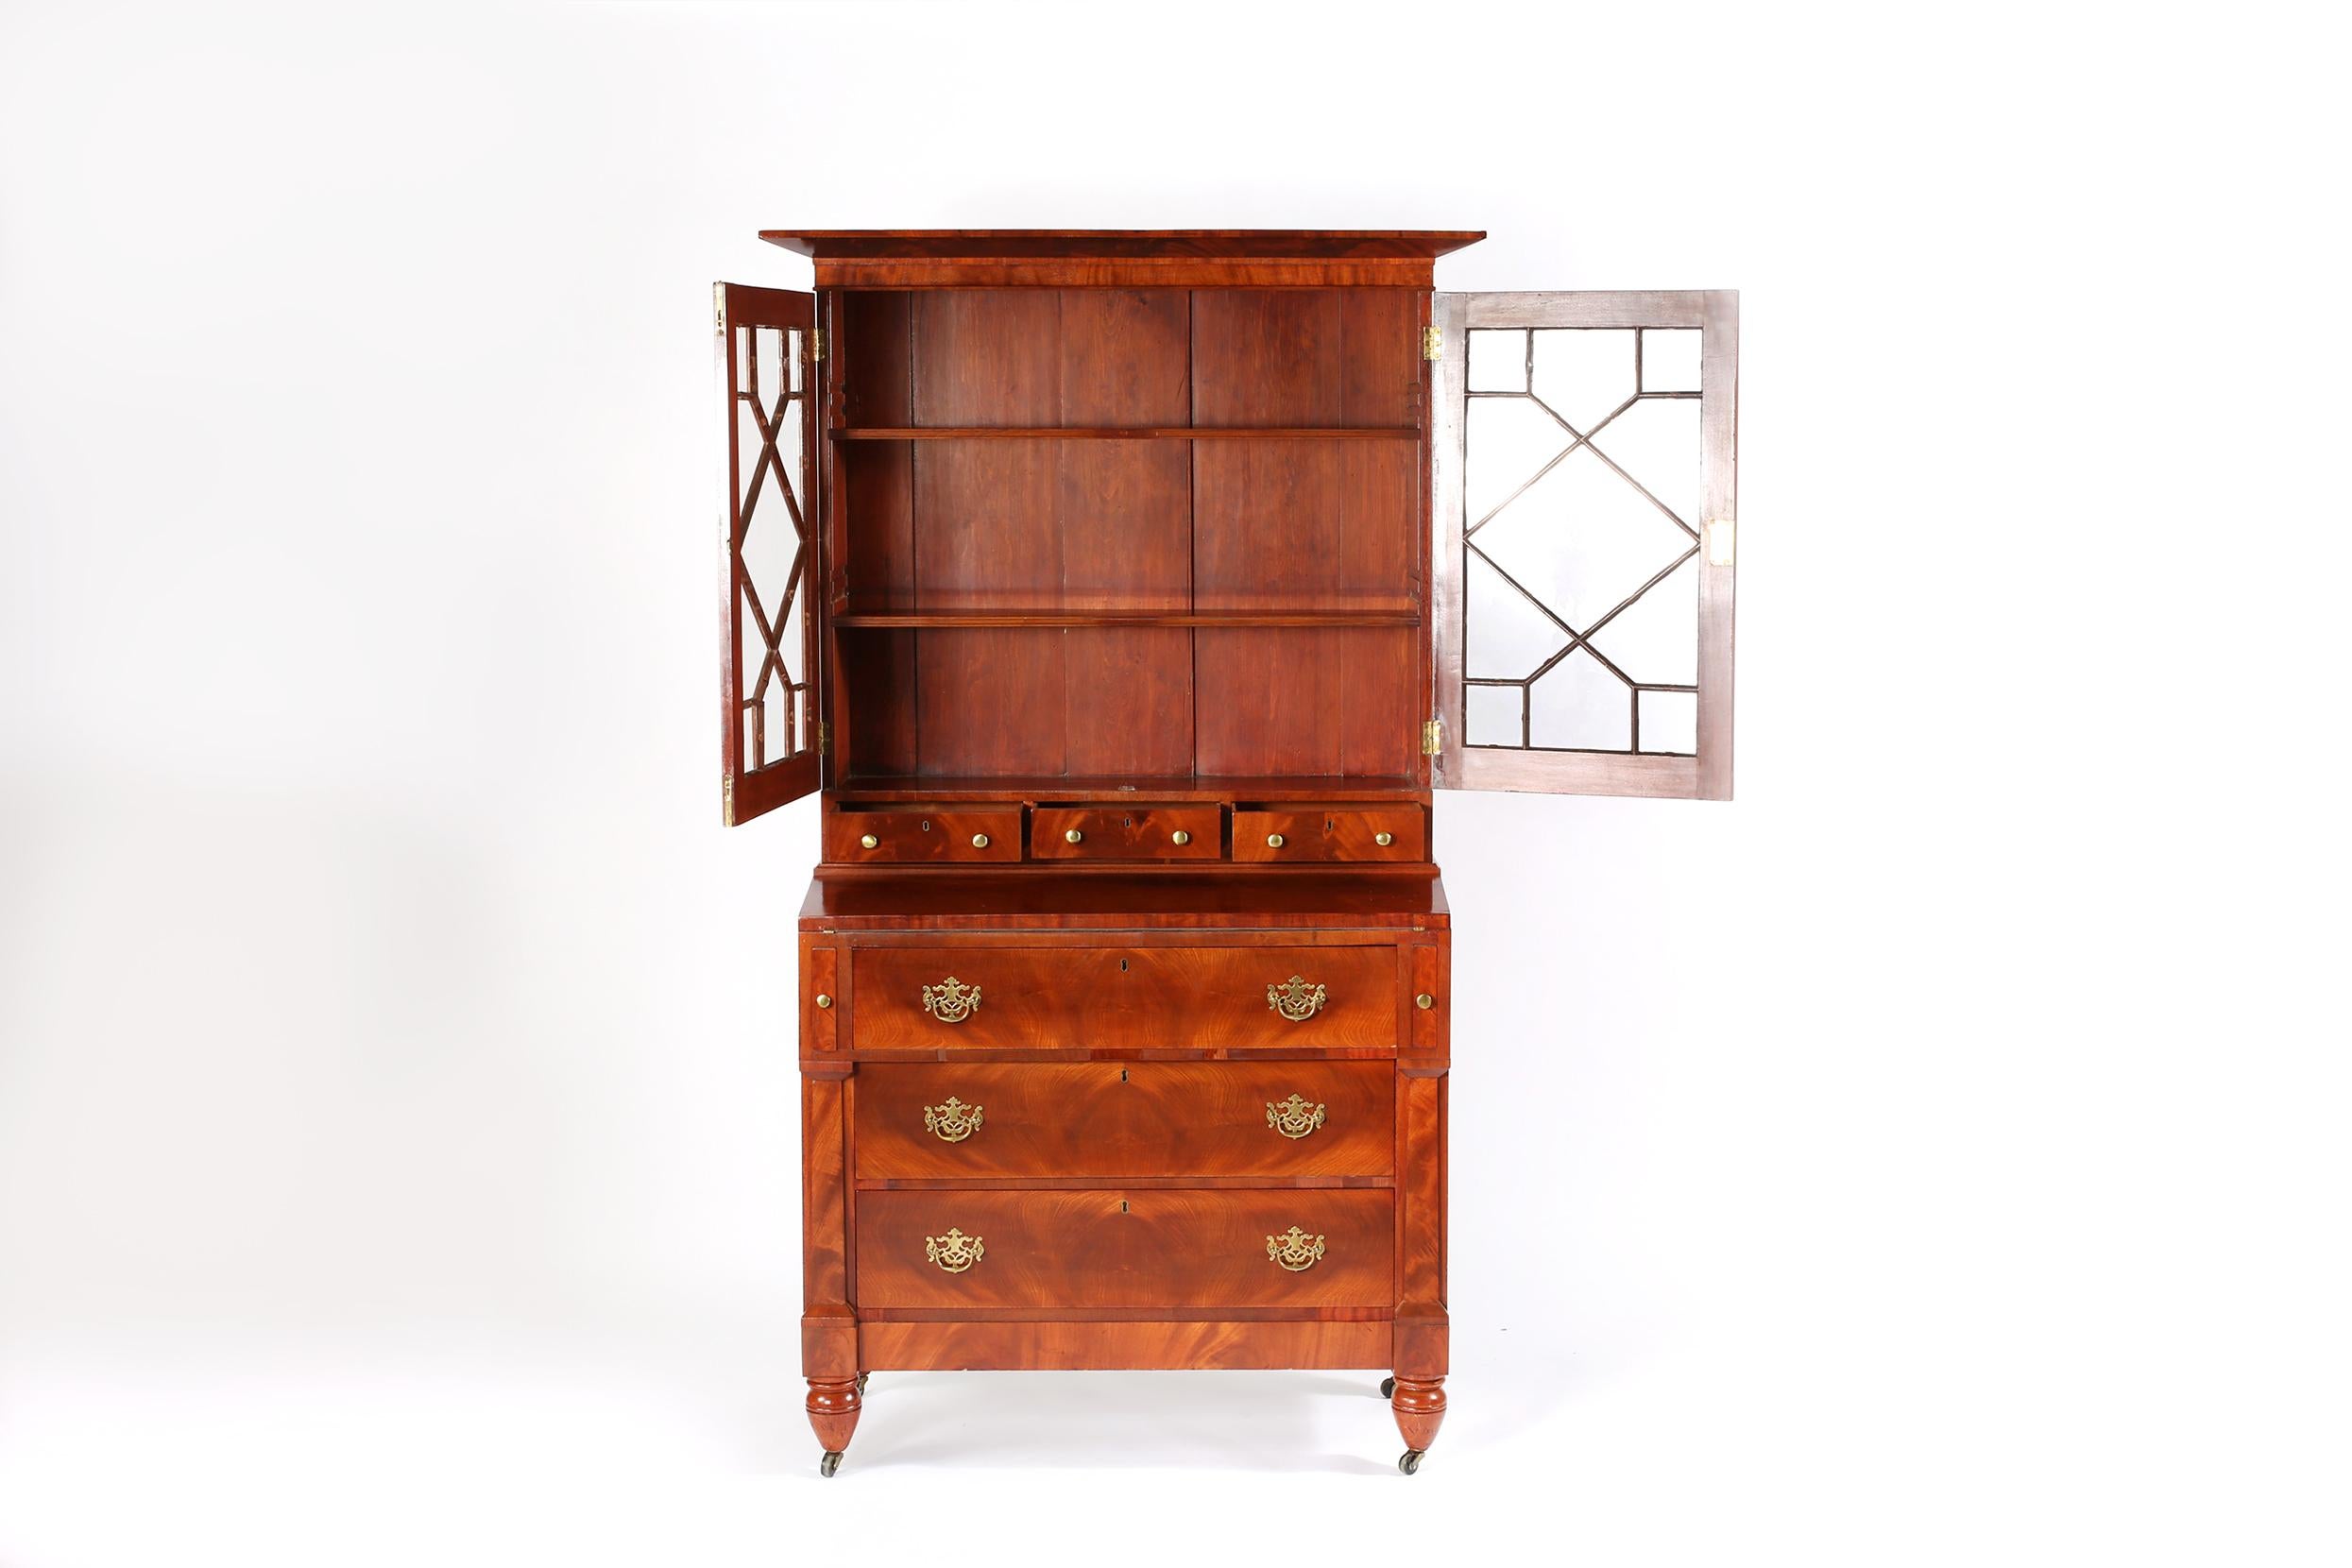 Hand-Crafted Early 19th Century Classical English Regency Bookcase Secretary Desk For Sale